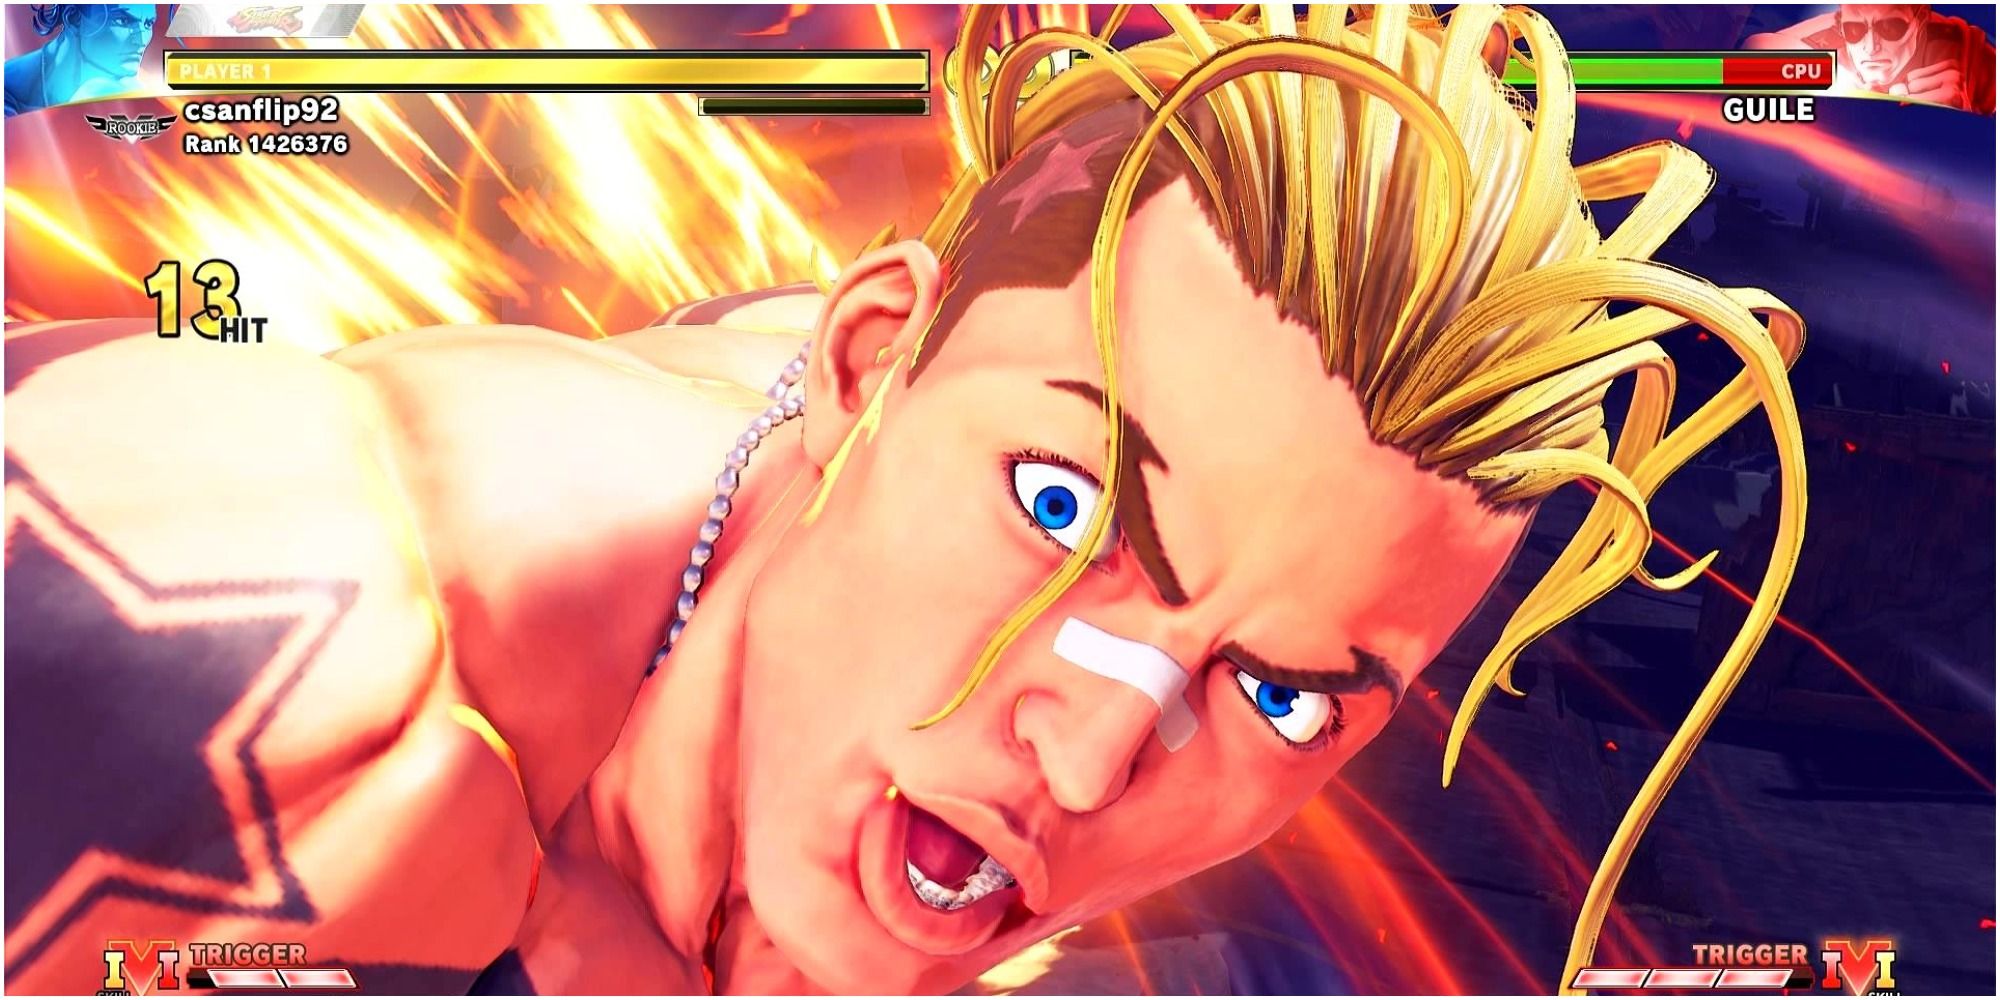 How To Play As Luke in SFV